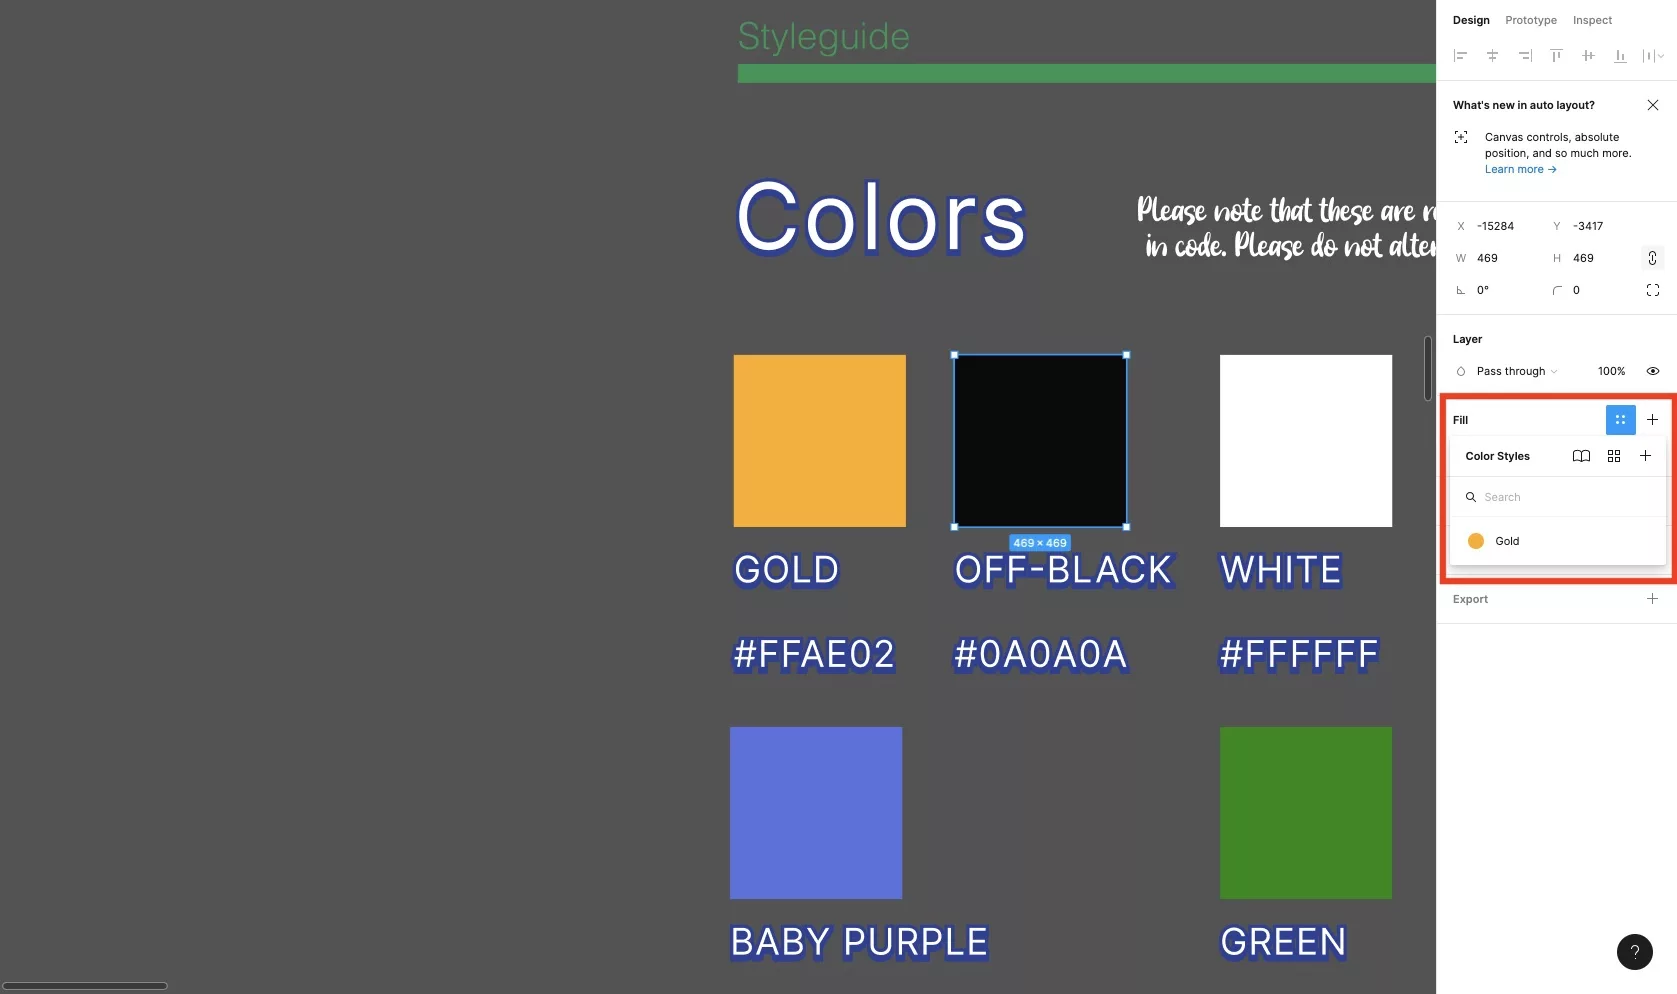 Your color should now appear under the Color Styles.